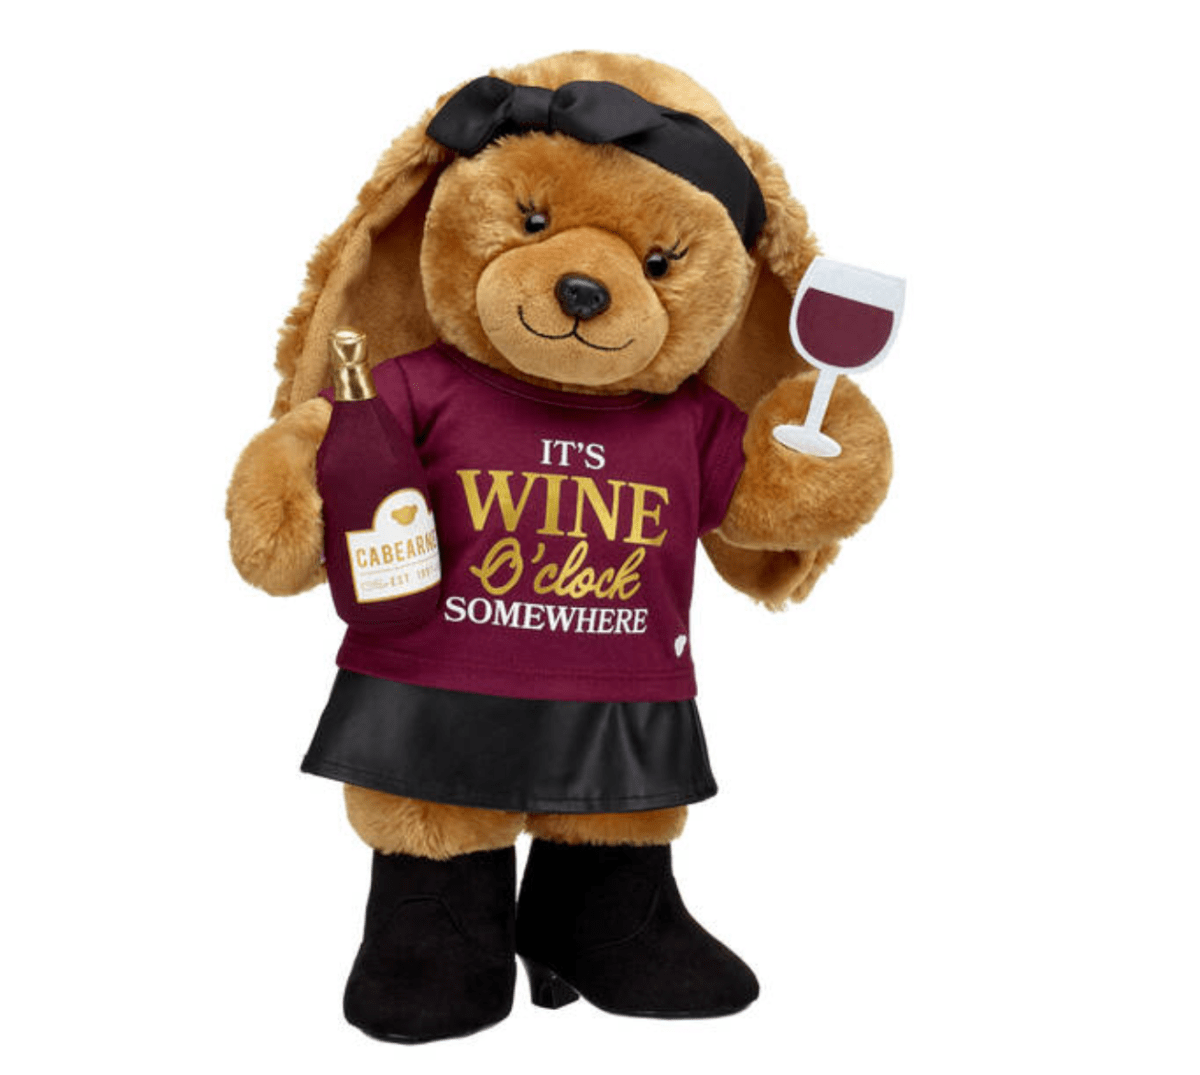 a plush bunny rabbit doll holding a bottle of wine and a wine glass, while wearing a shirt that says "it's wine o'clock somewhere."